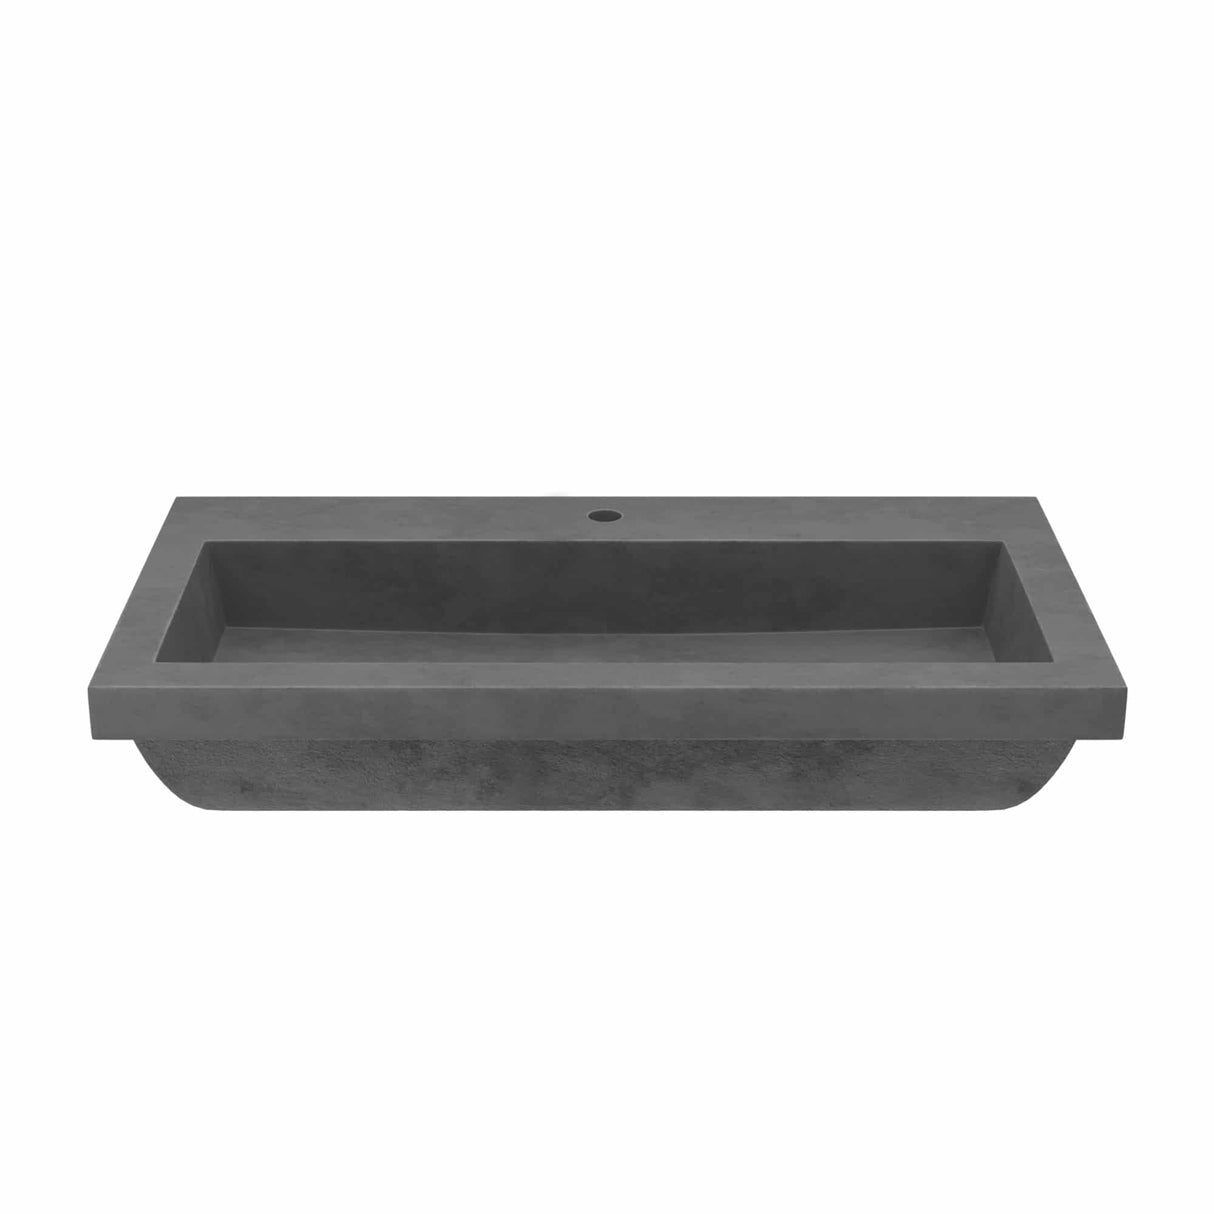 Trough 3619 in Charcoal